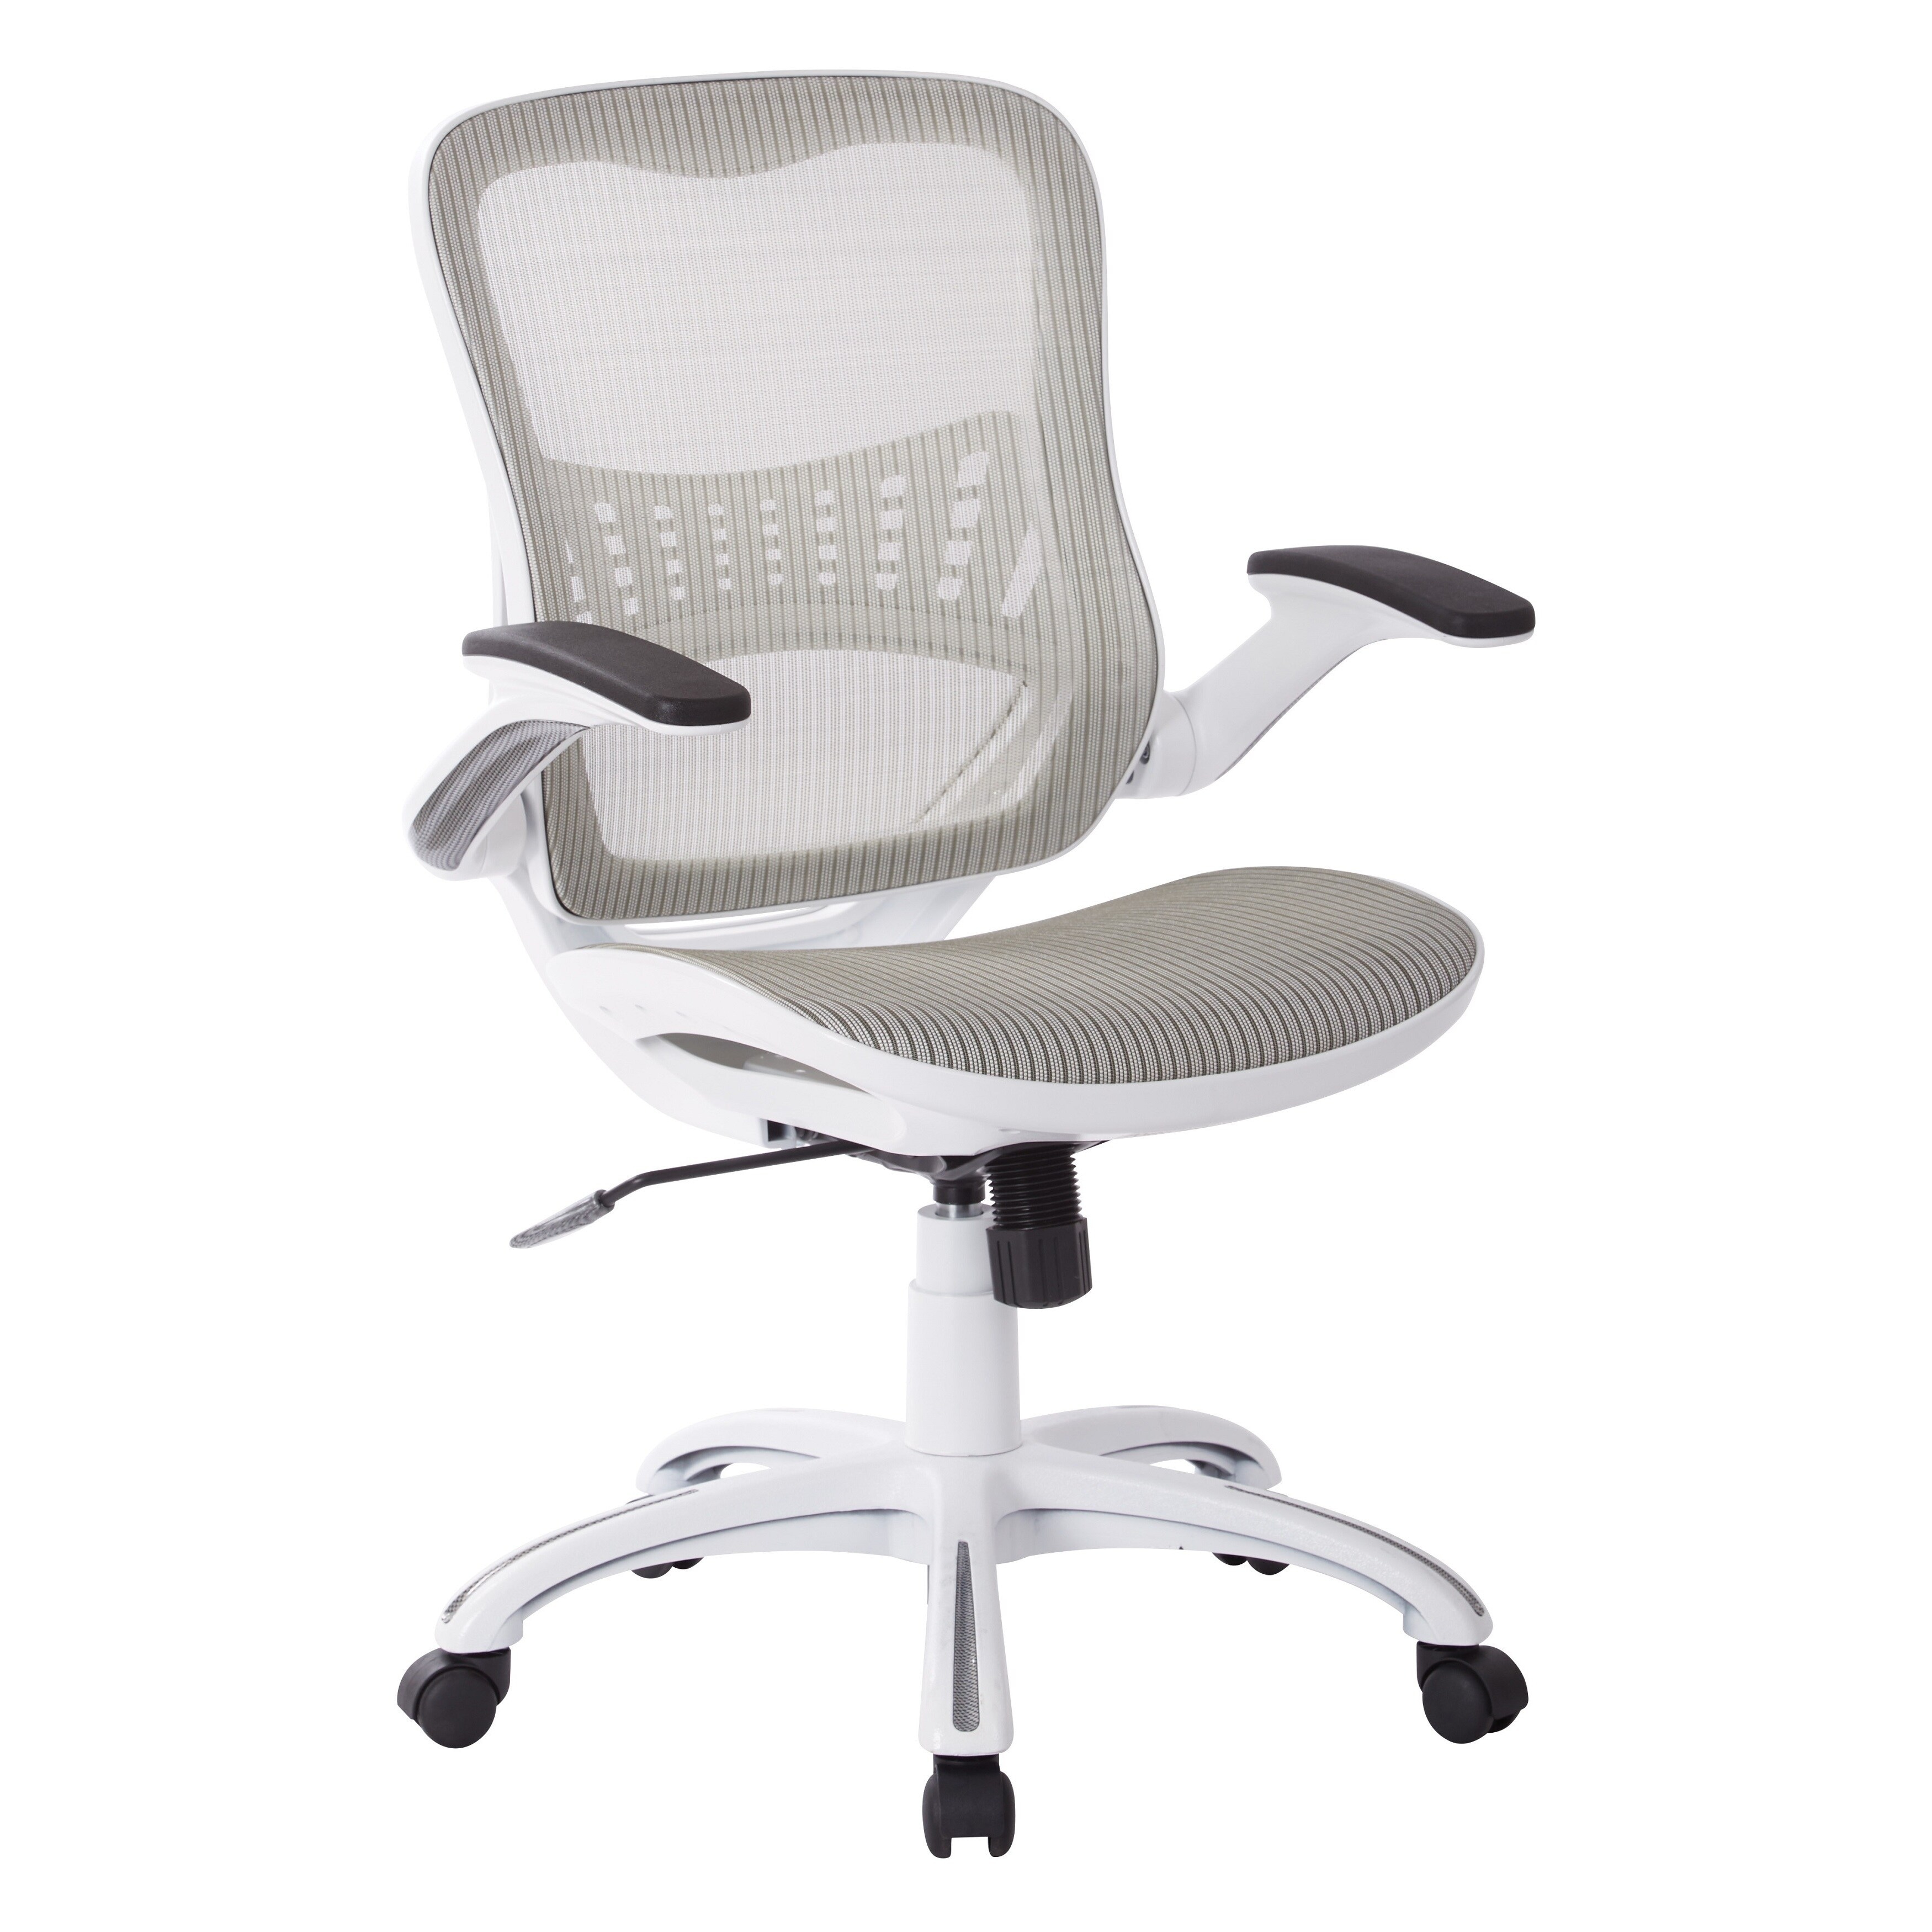 https://ak1.ostkcdn.com/images/products/is/images/direct/8f94caa8628bf5b8232dbc2c6de40f08bc266244/Riley-Office-Chair-with-White-Mesh-Seat-and-Back.jpg